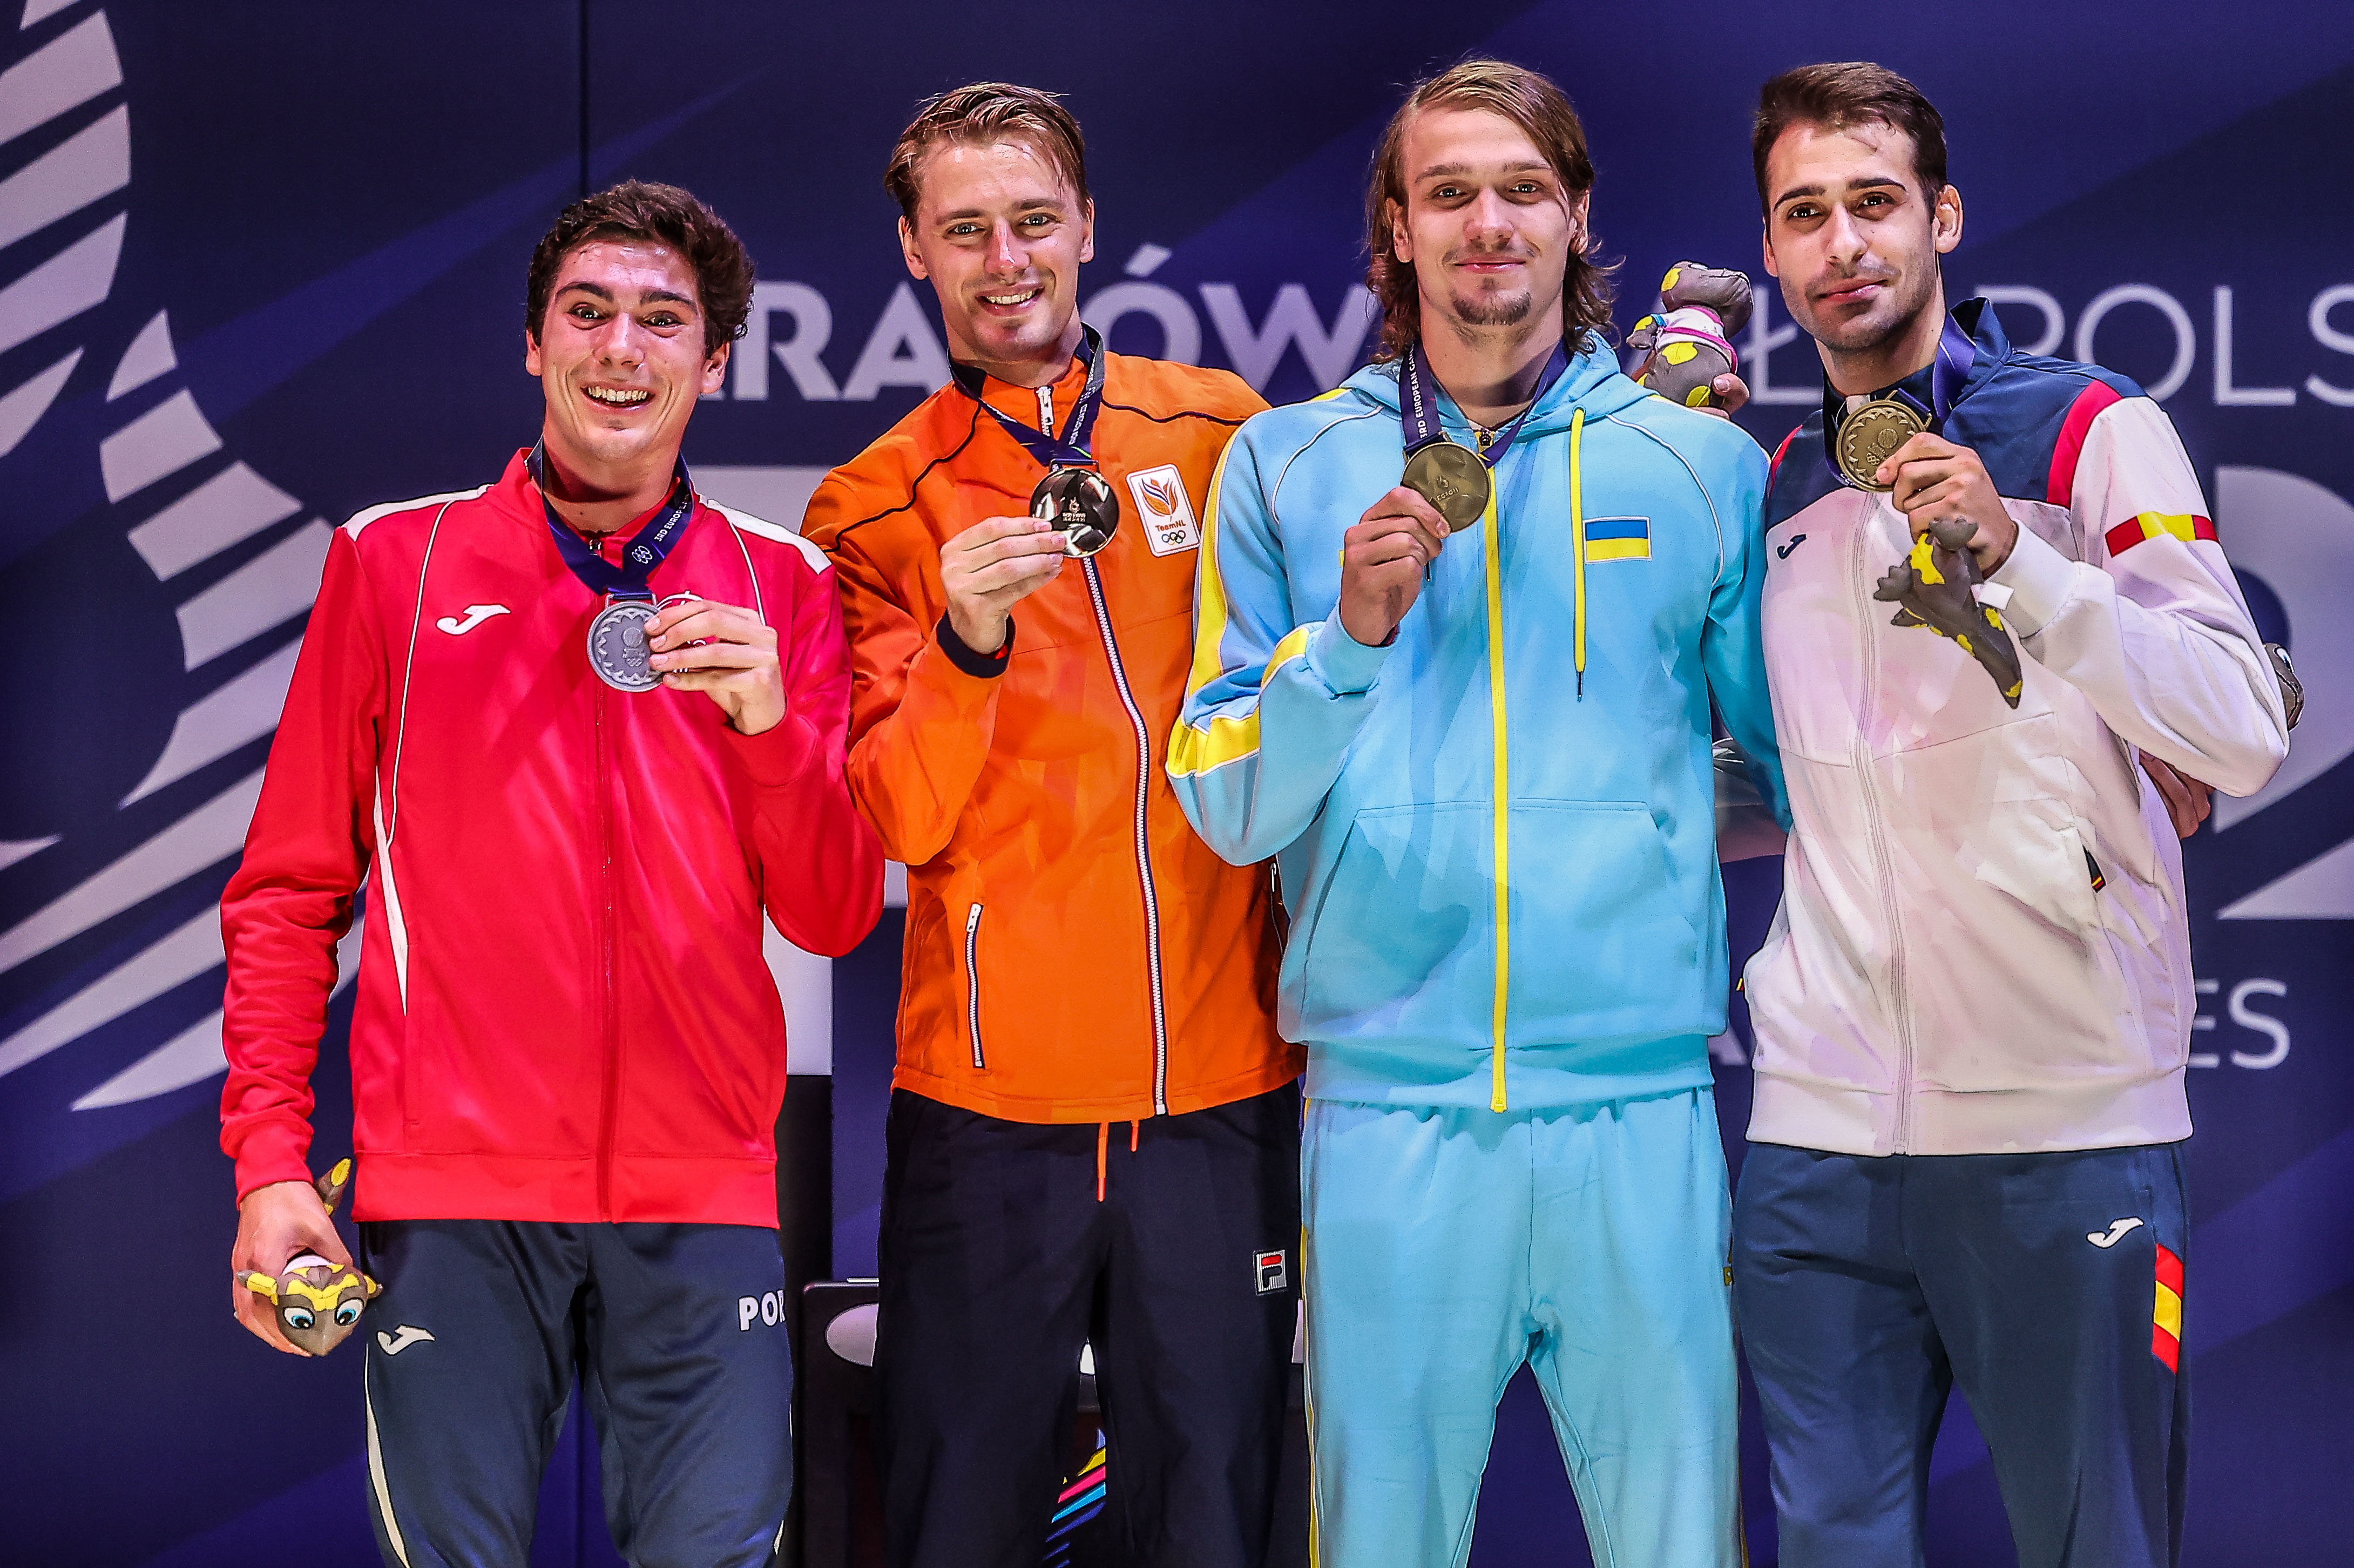 Gold for the Netherlands in men’s epee